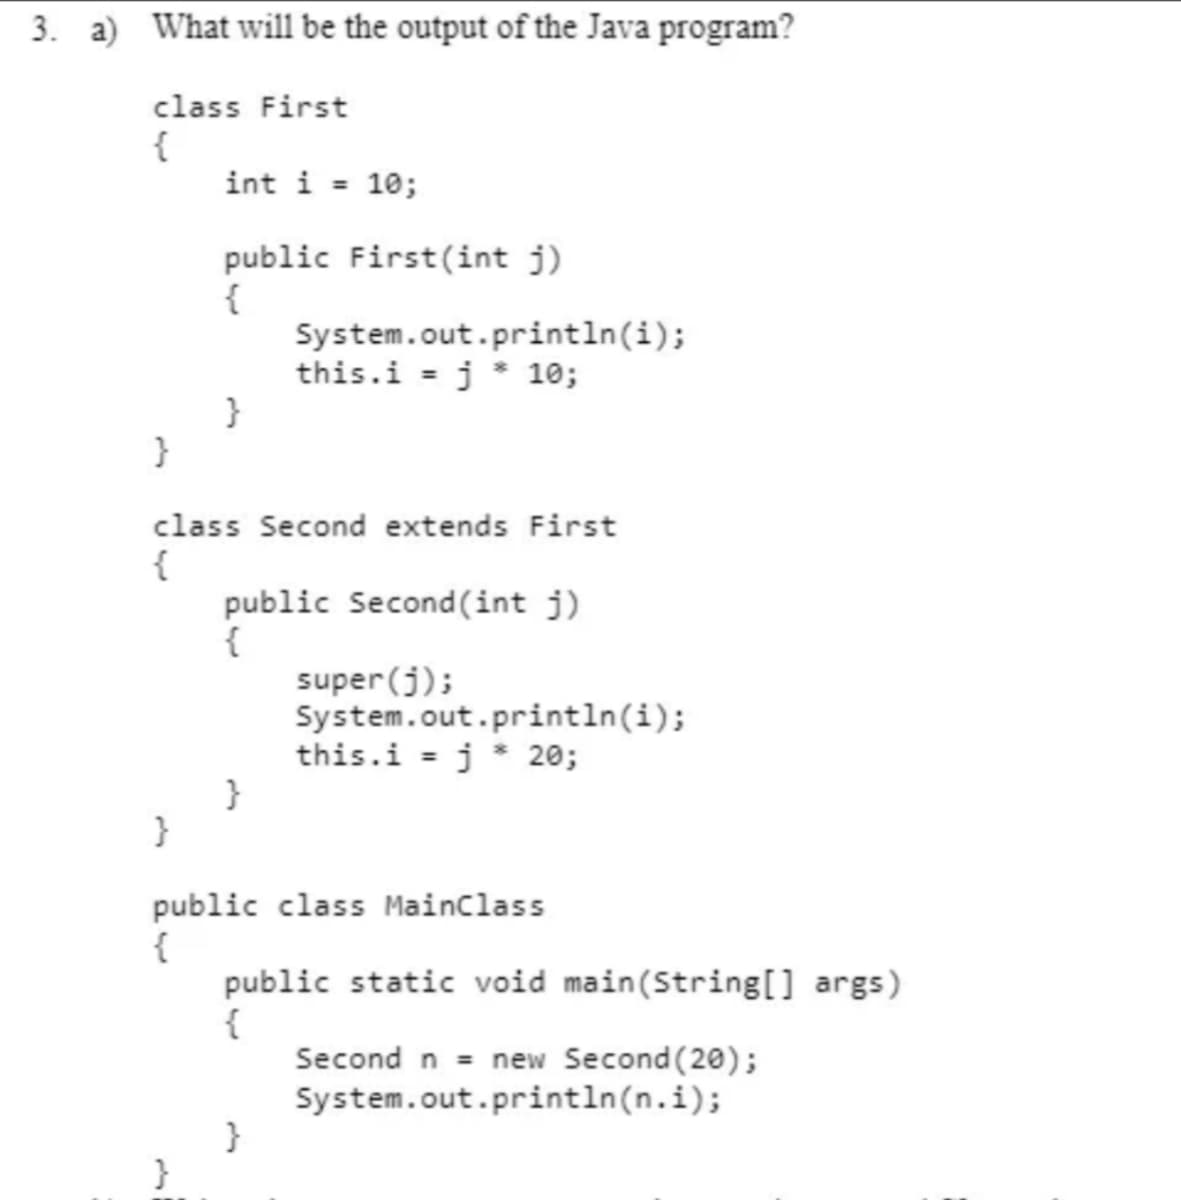 3. a) What will be the output of the Java program?
class First
{
int i = 10;
public First(int j)
{
System.out.println(i);
this.i = j * 10;
}
}
class Second extends First
{
public Second(int j)
{
super (j);
System.out.println(i);
this.i = j* 20;
}
}
public class Mainclass
{
public static void main(String[] args)
{
Second n = new Second (20);
System.out.println(n.i);
%3D
